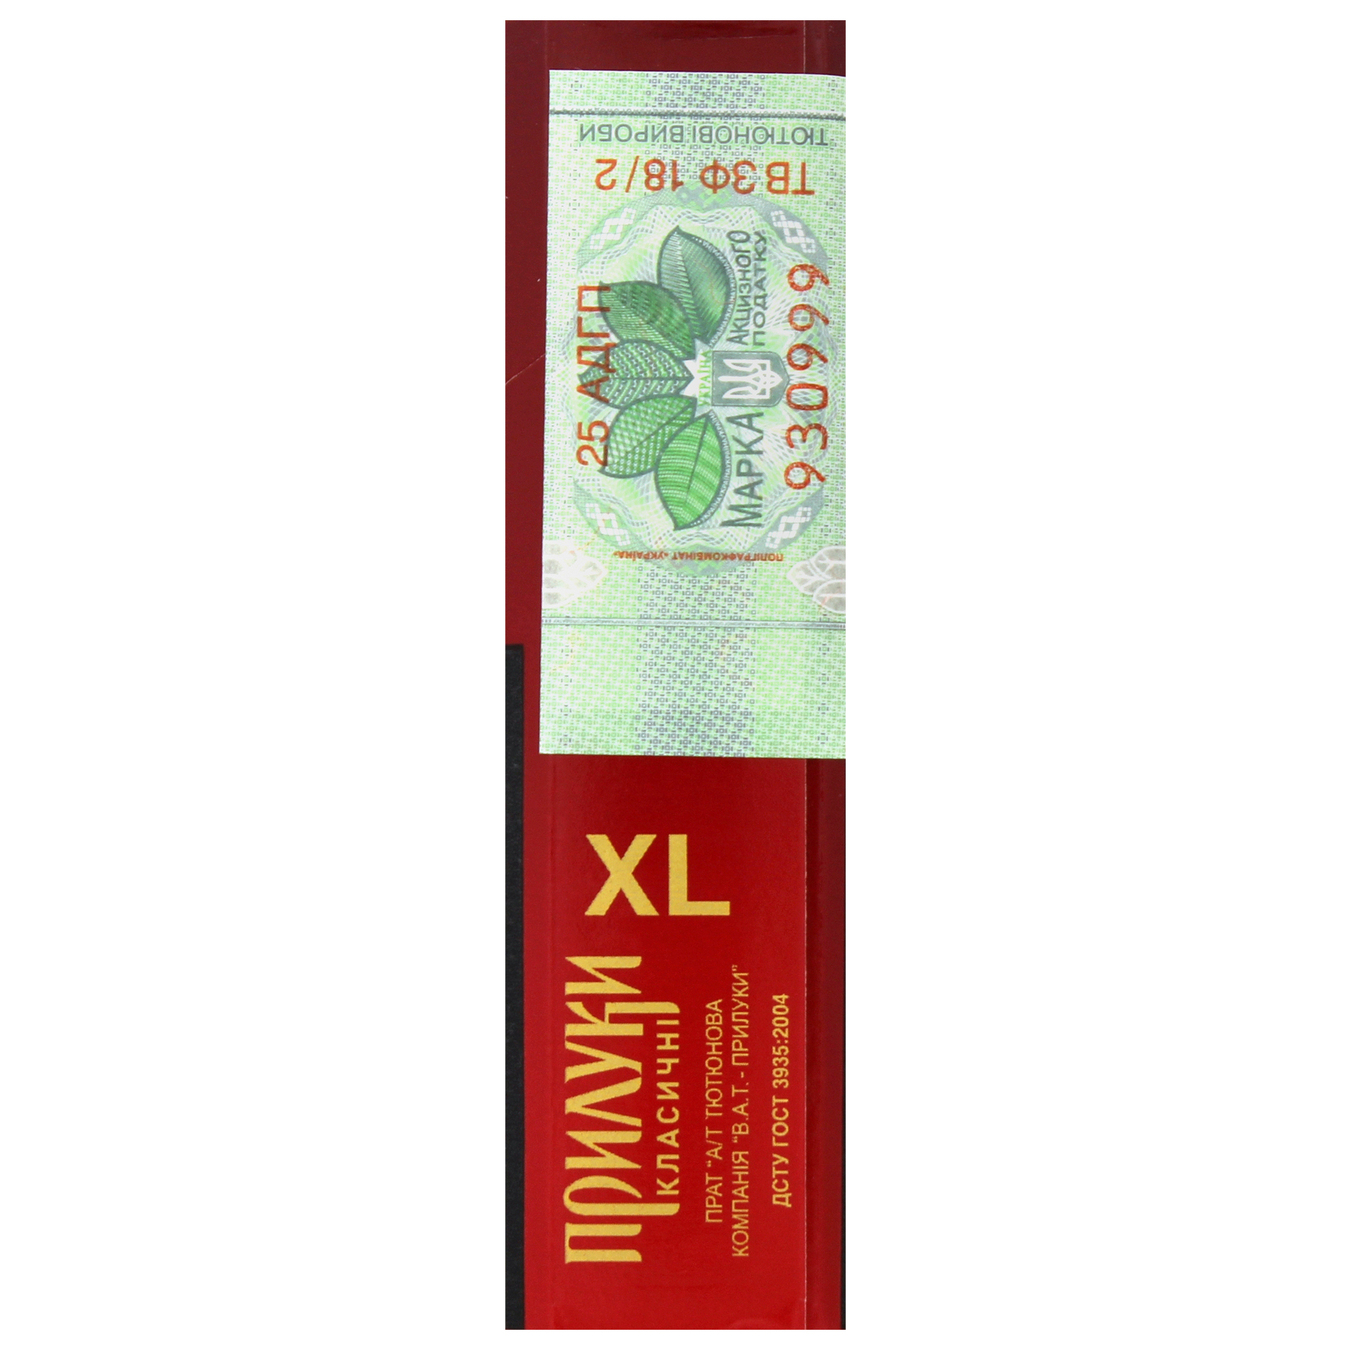 Plyuky Cigarettes Classic XL 25 pcs (the price is indicated without excise tax) 4